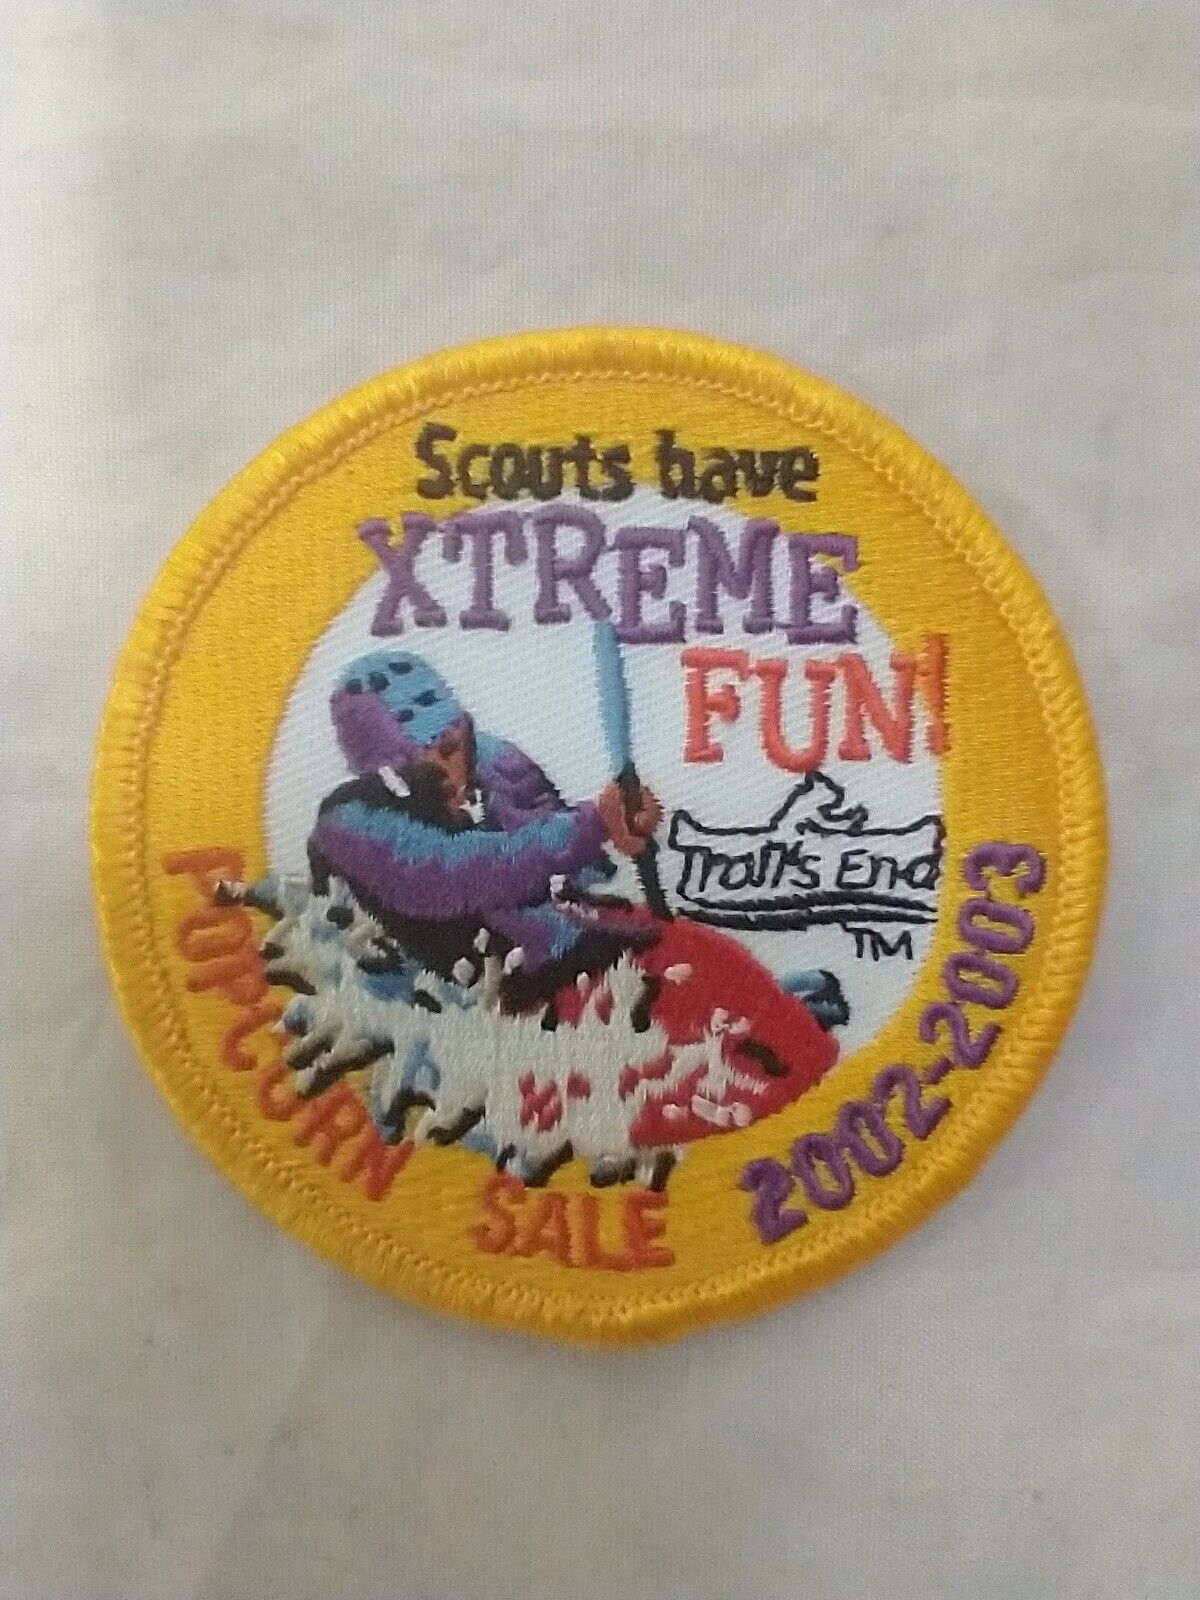 2002-2003 Popcorn Sale Embroidered Patch BSA \'Scouts Have Xtreme Fun\'